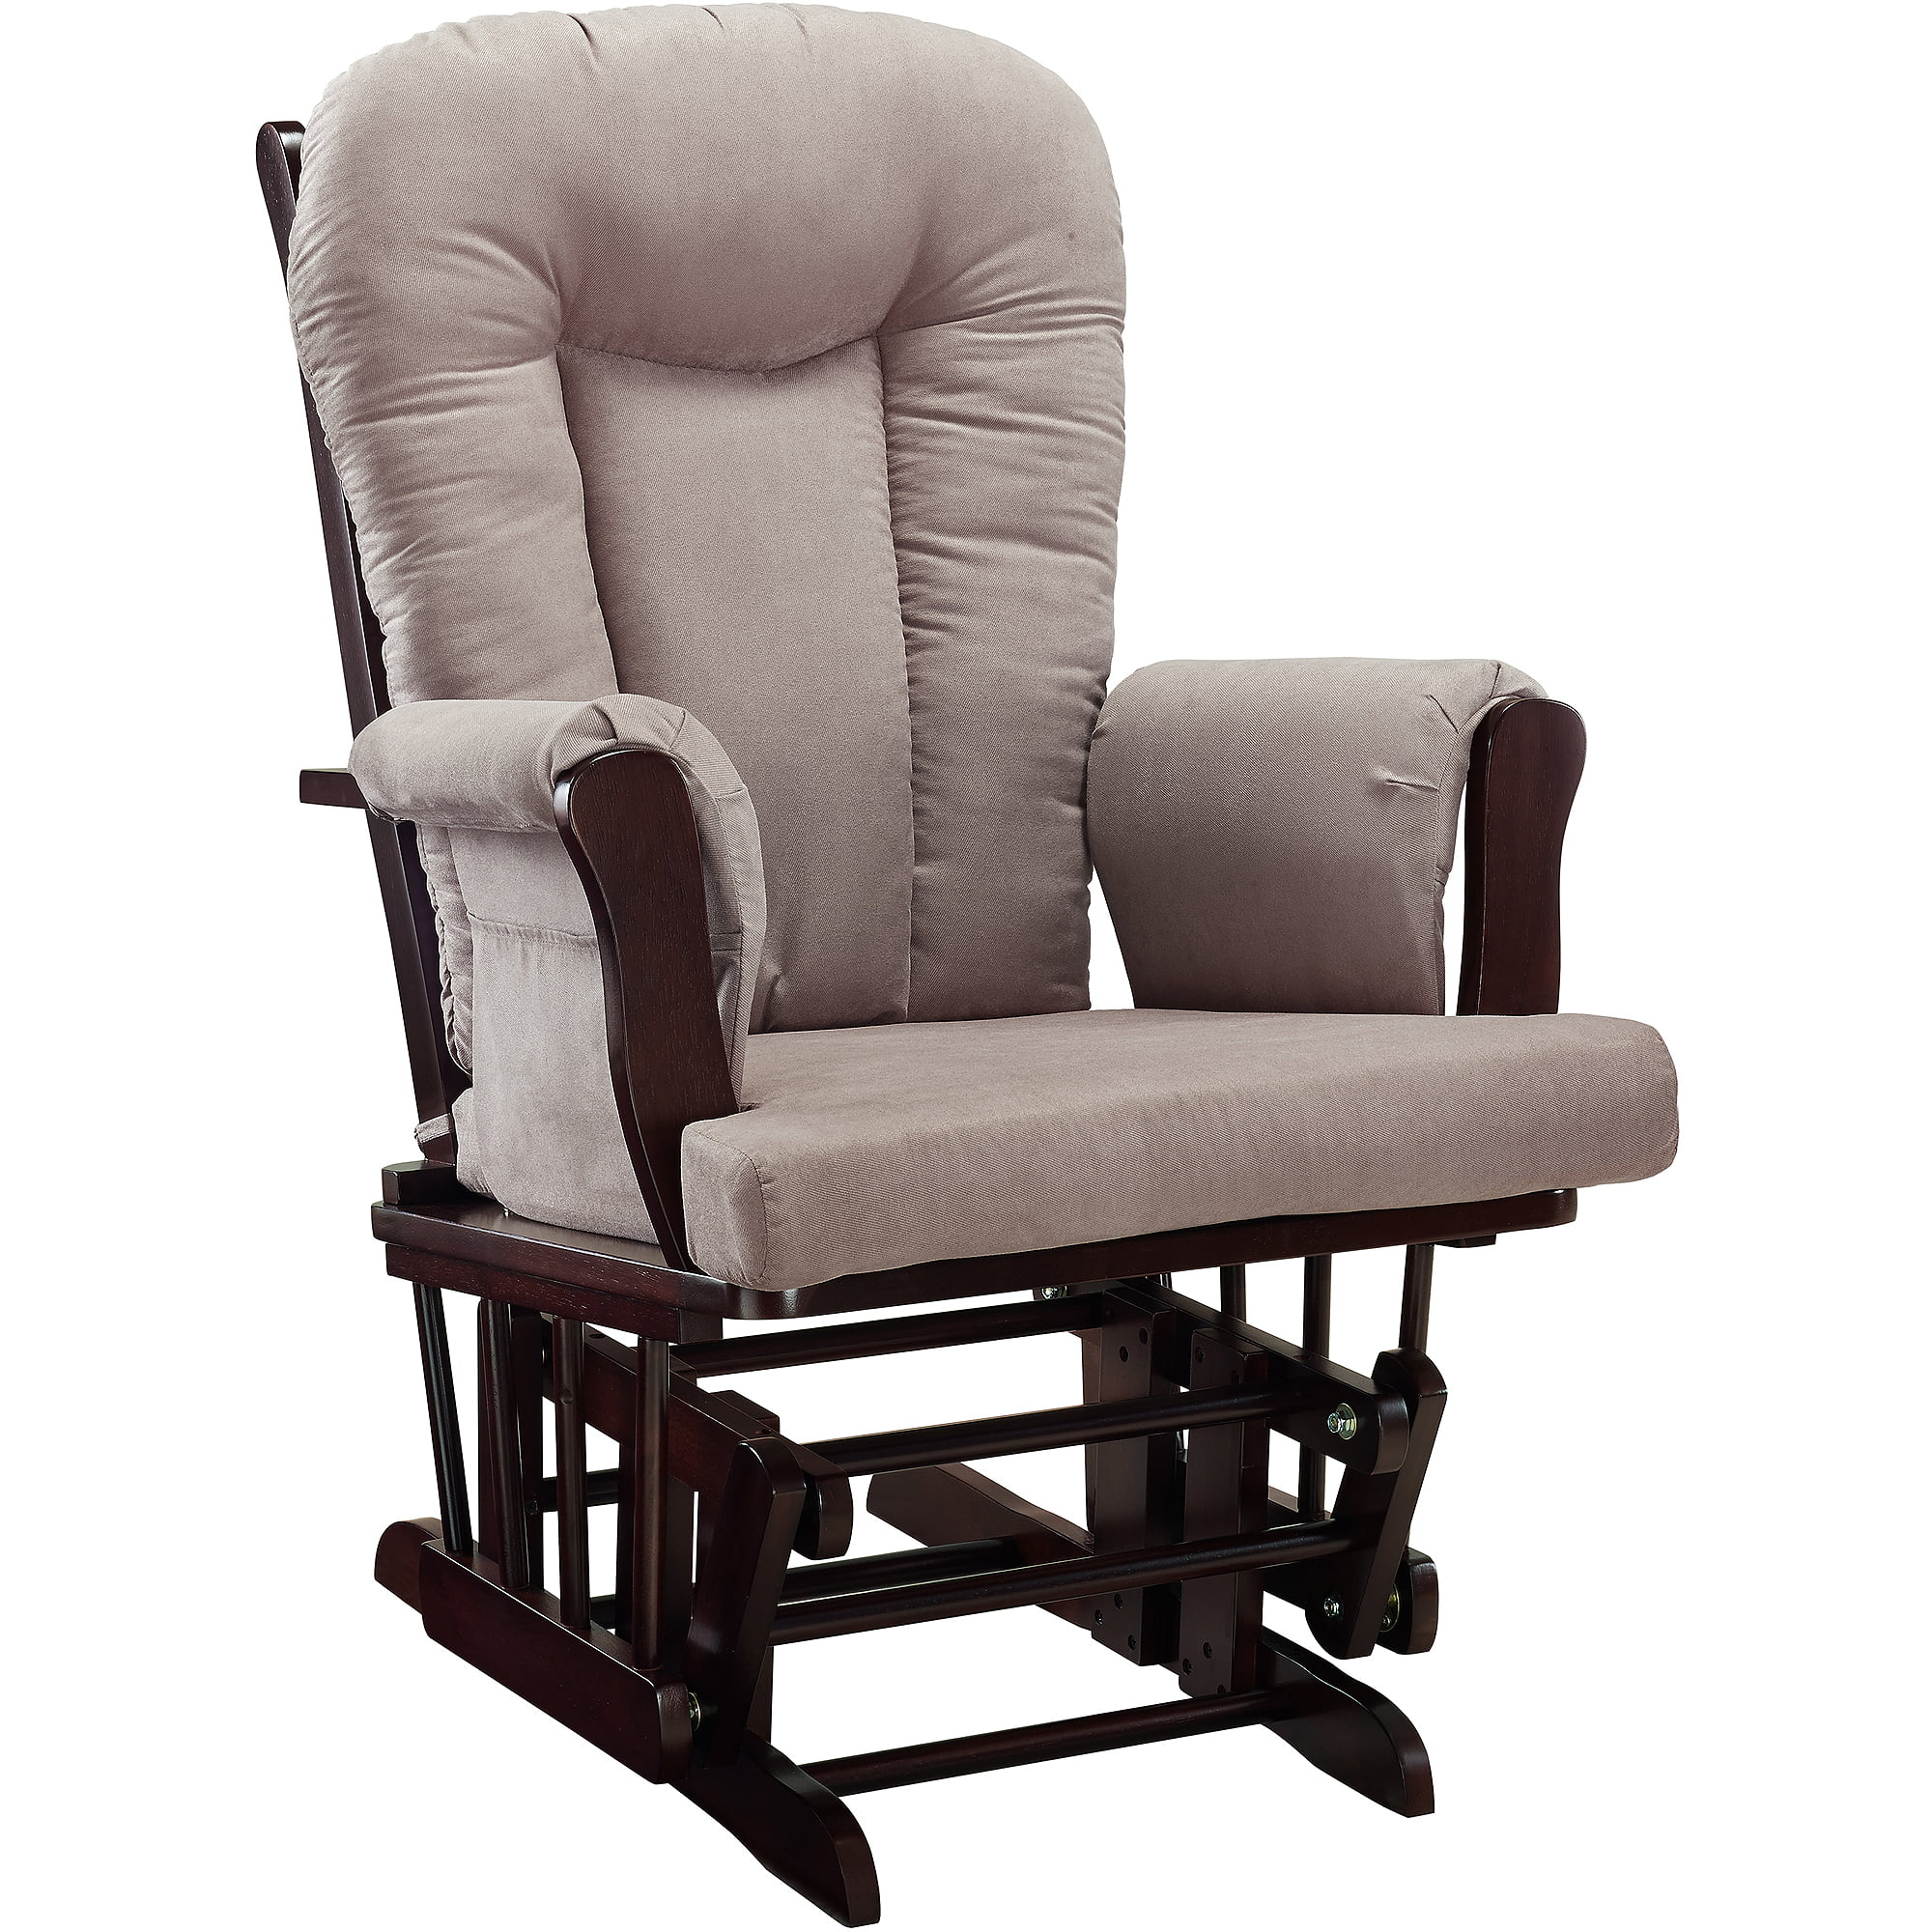 baby relax glider rocker and ottoman espresso with gray cushions